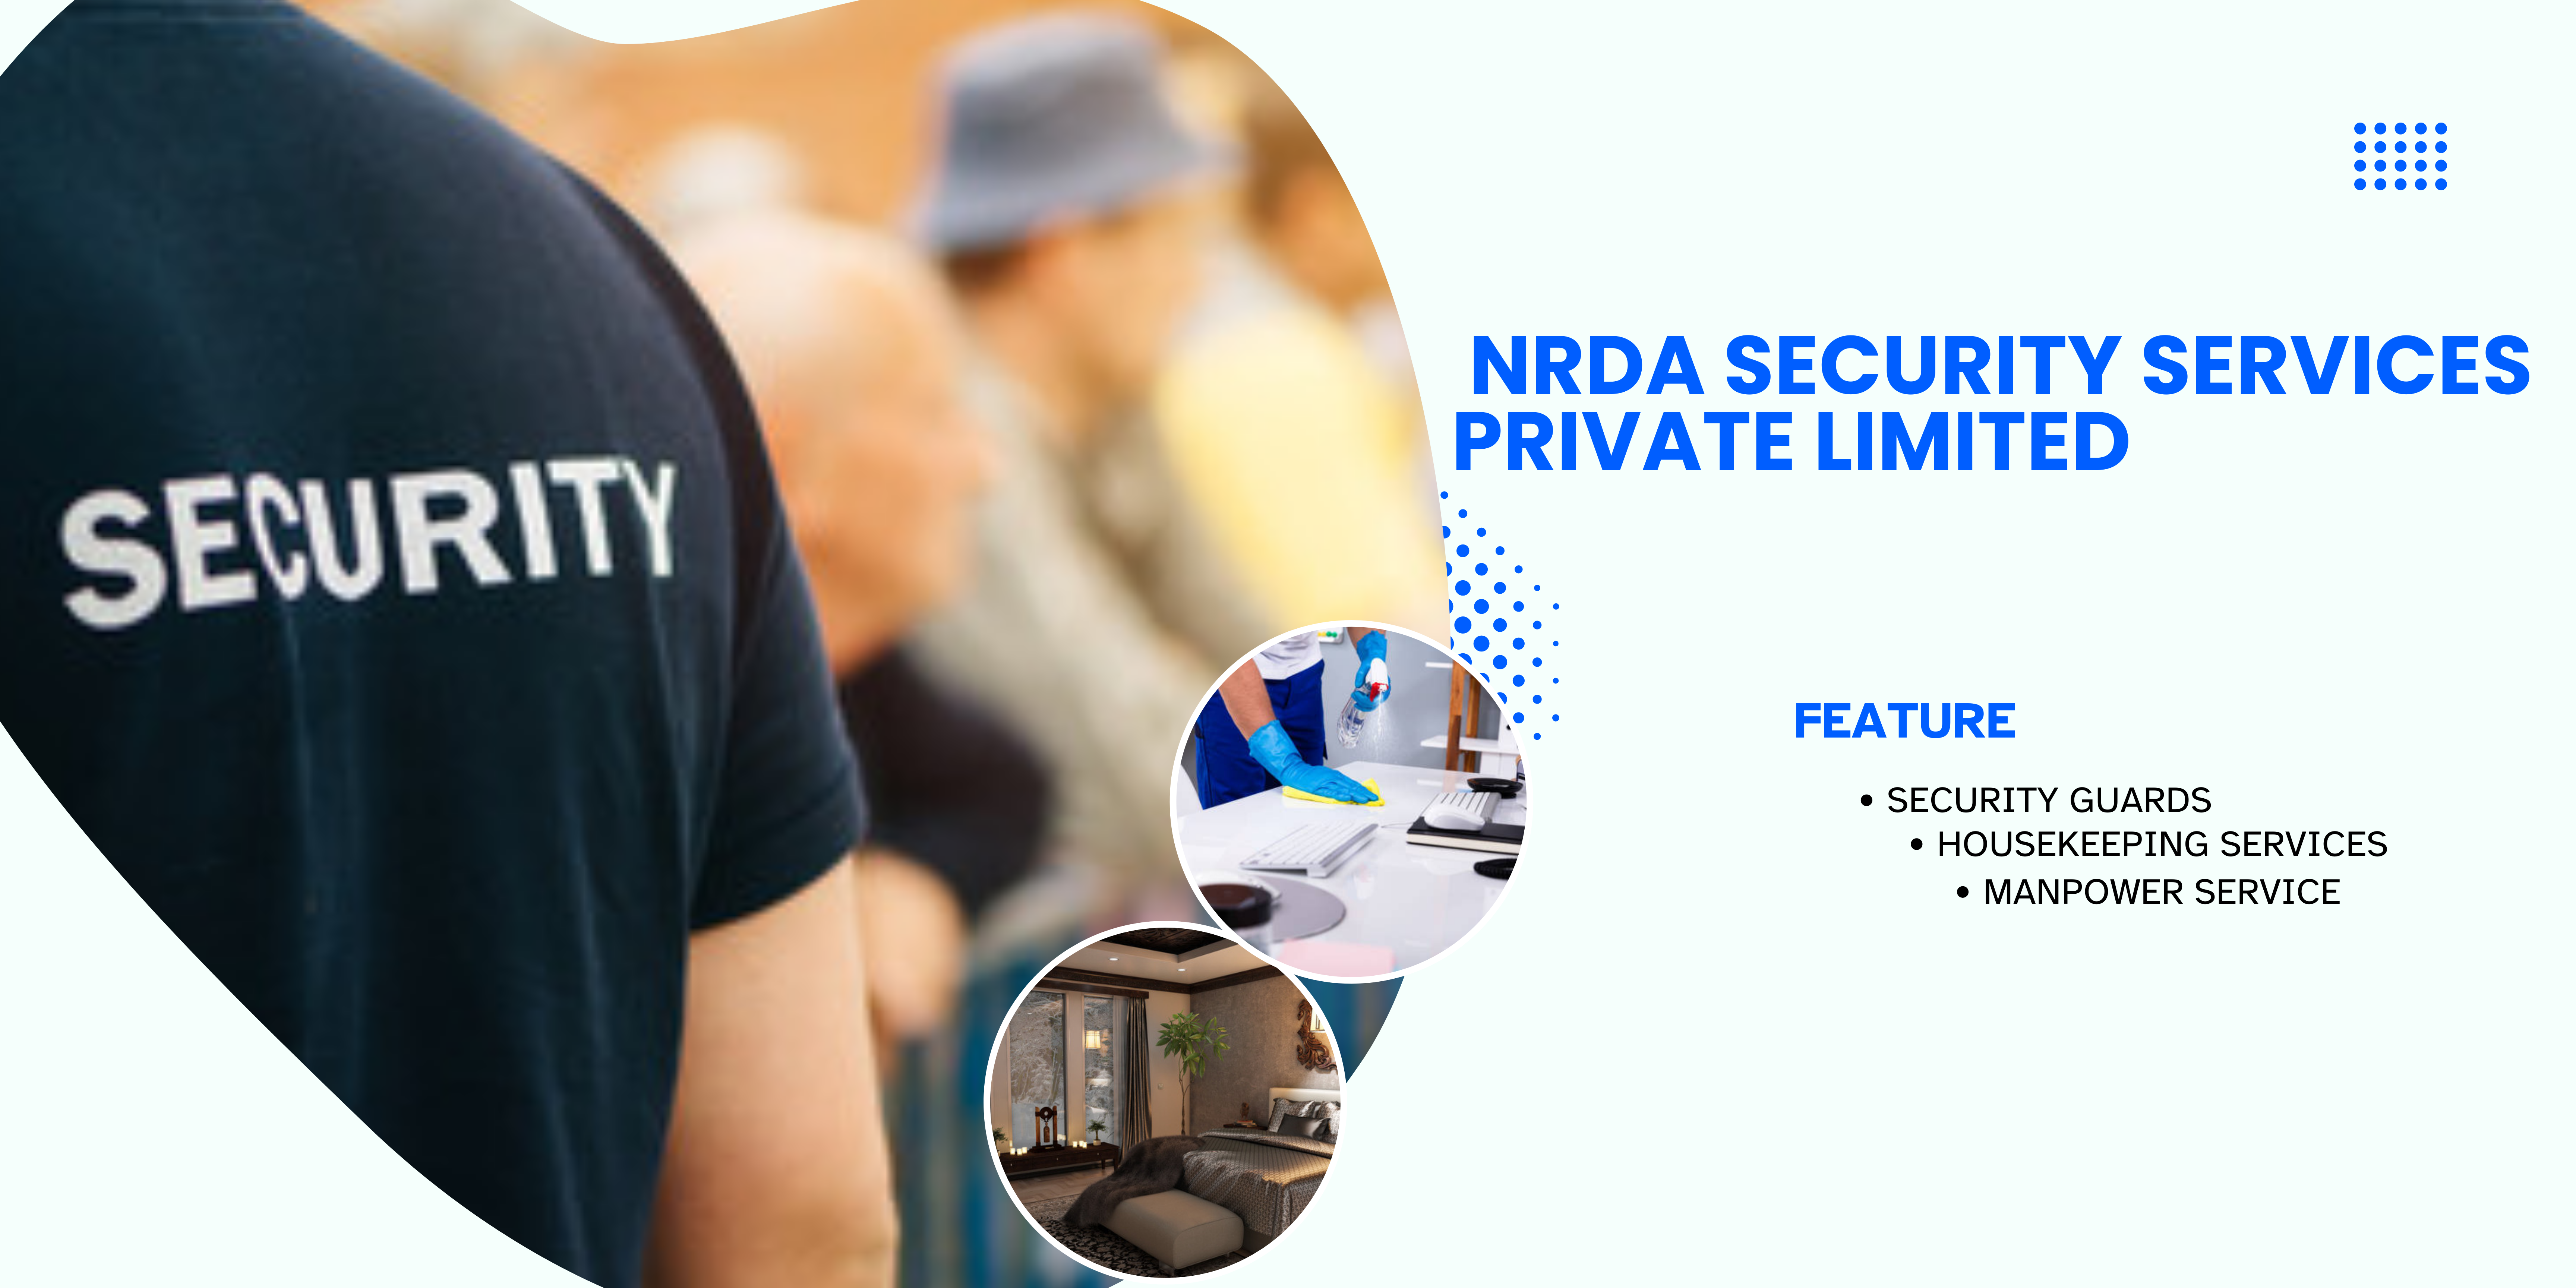 NRDA SECURITY SERVICES PRIVATE LIMITED